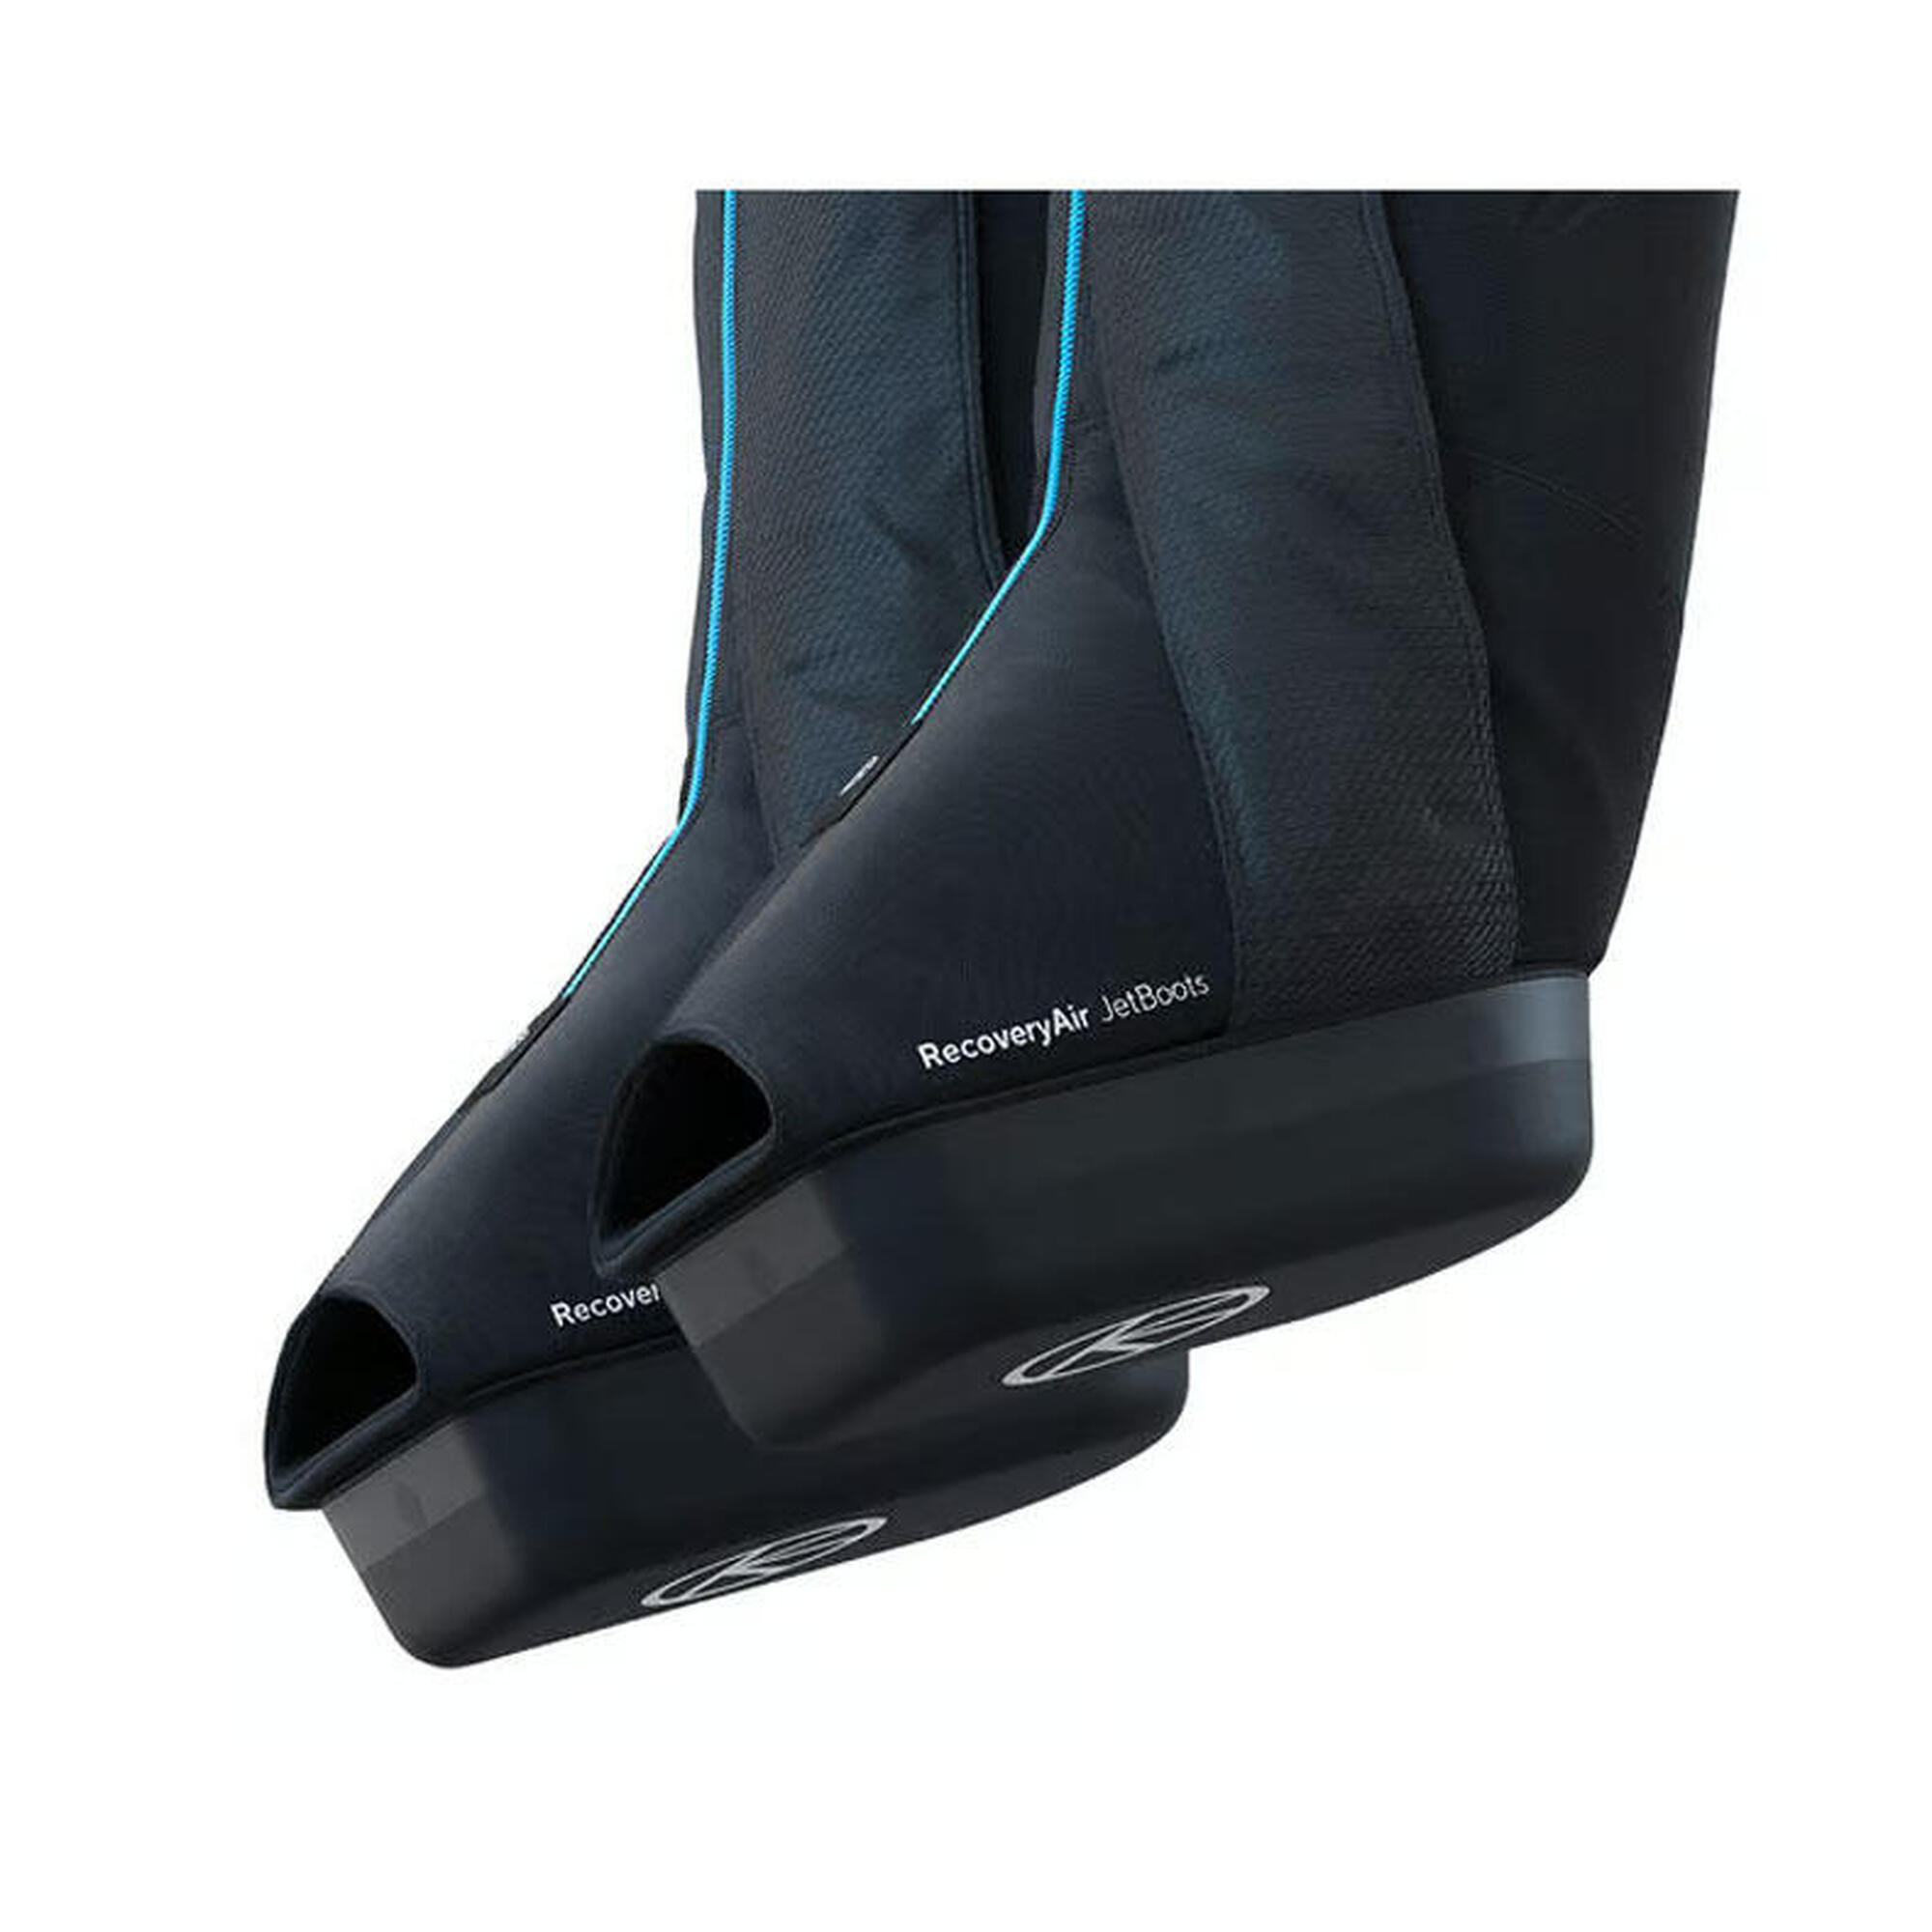 Bottes de Compression Therabody RecoveryAir JetBoots - M